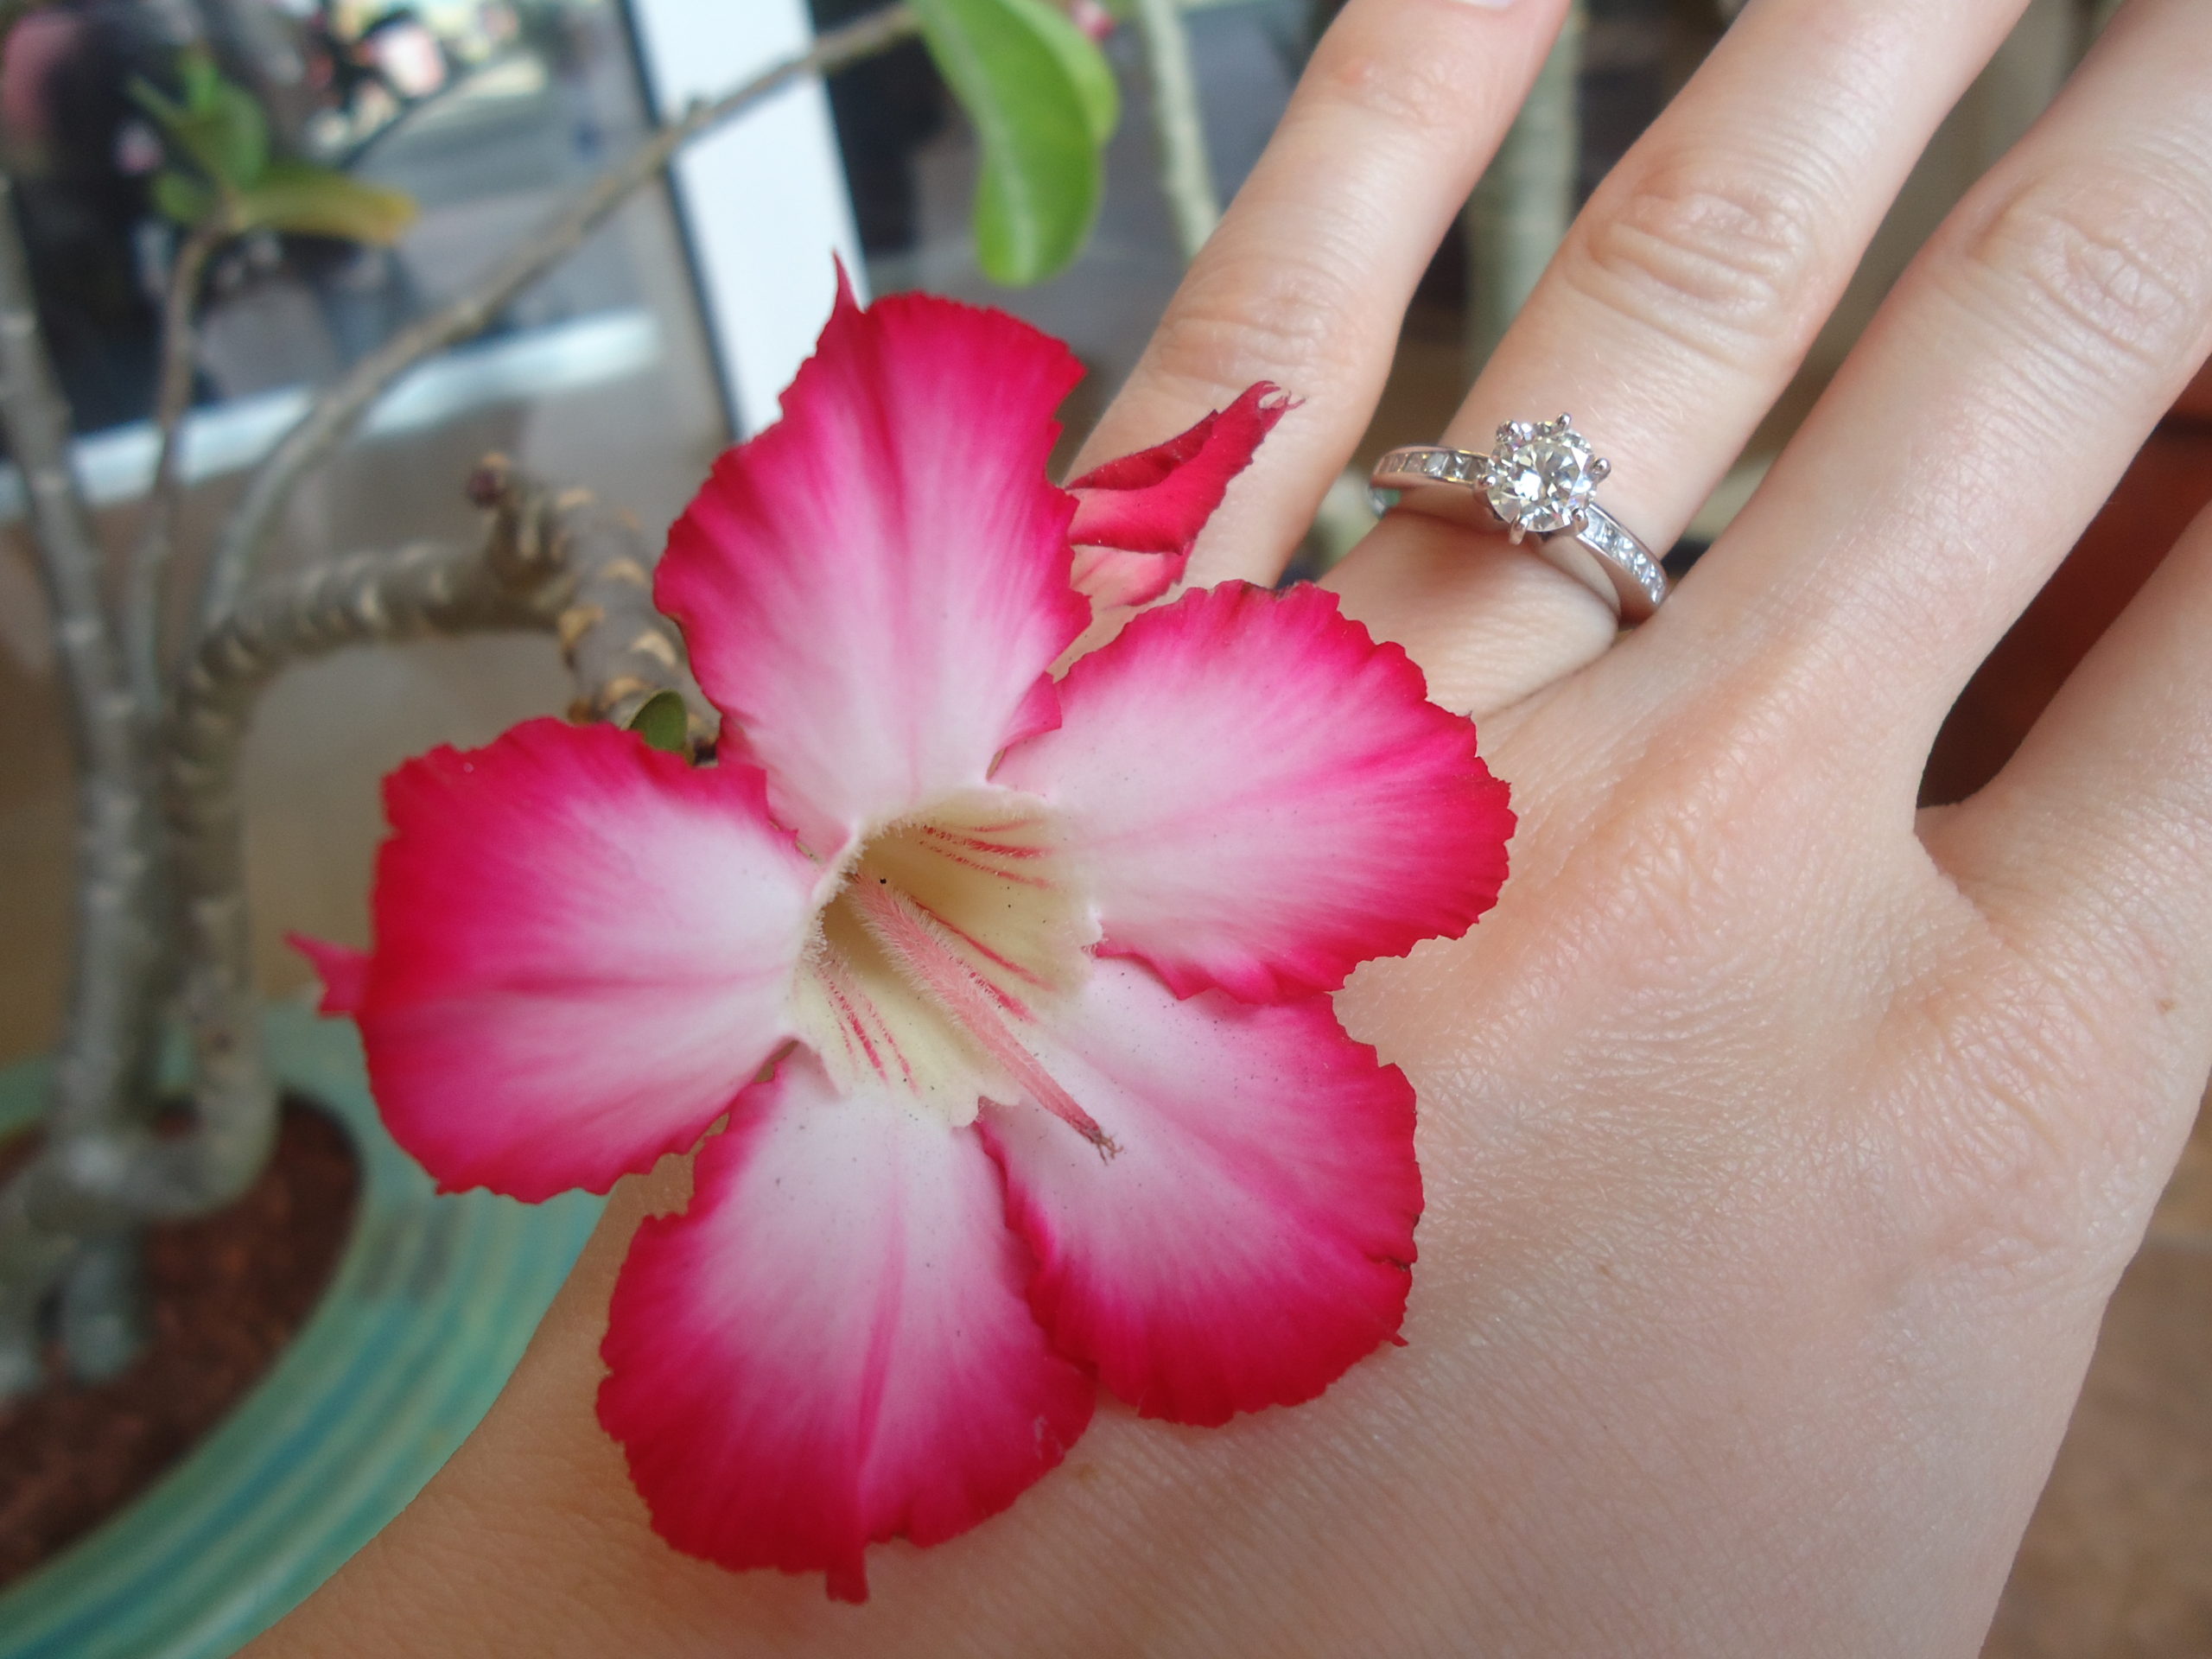 Pink flower in foreground with diamond engagement ring on a girls hand